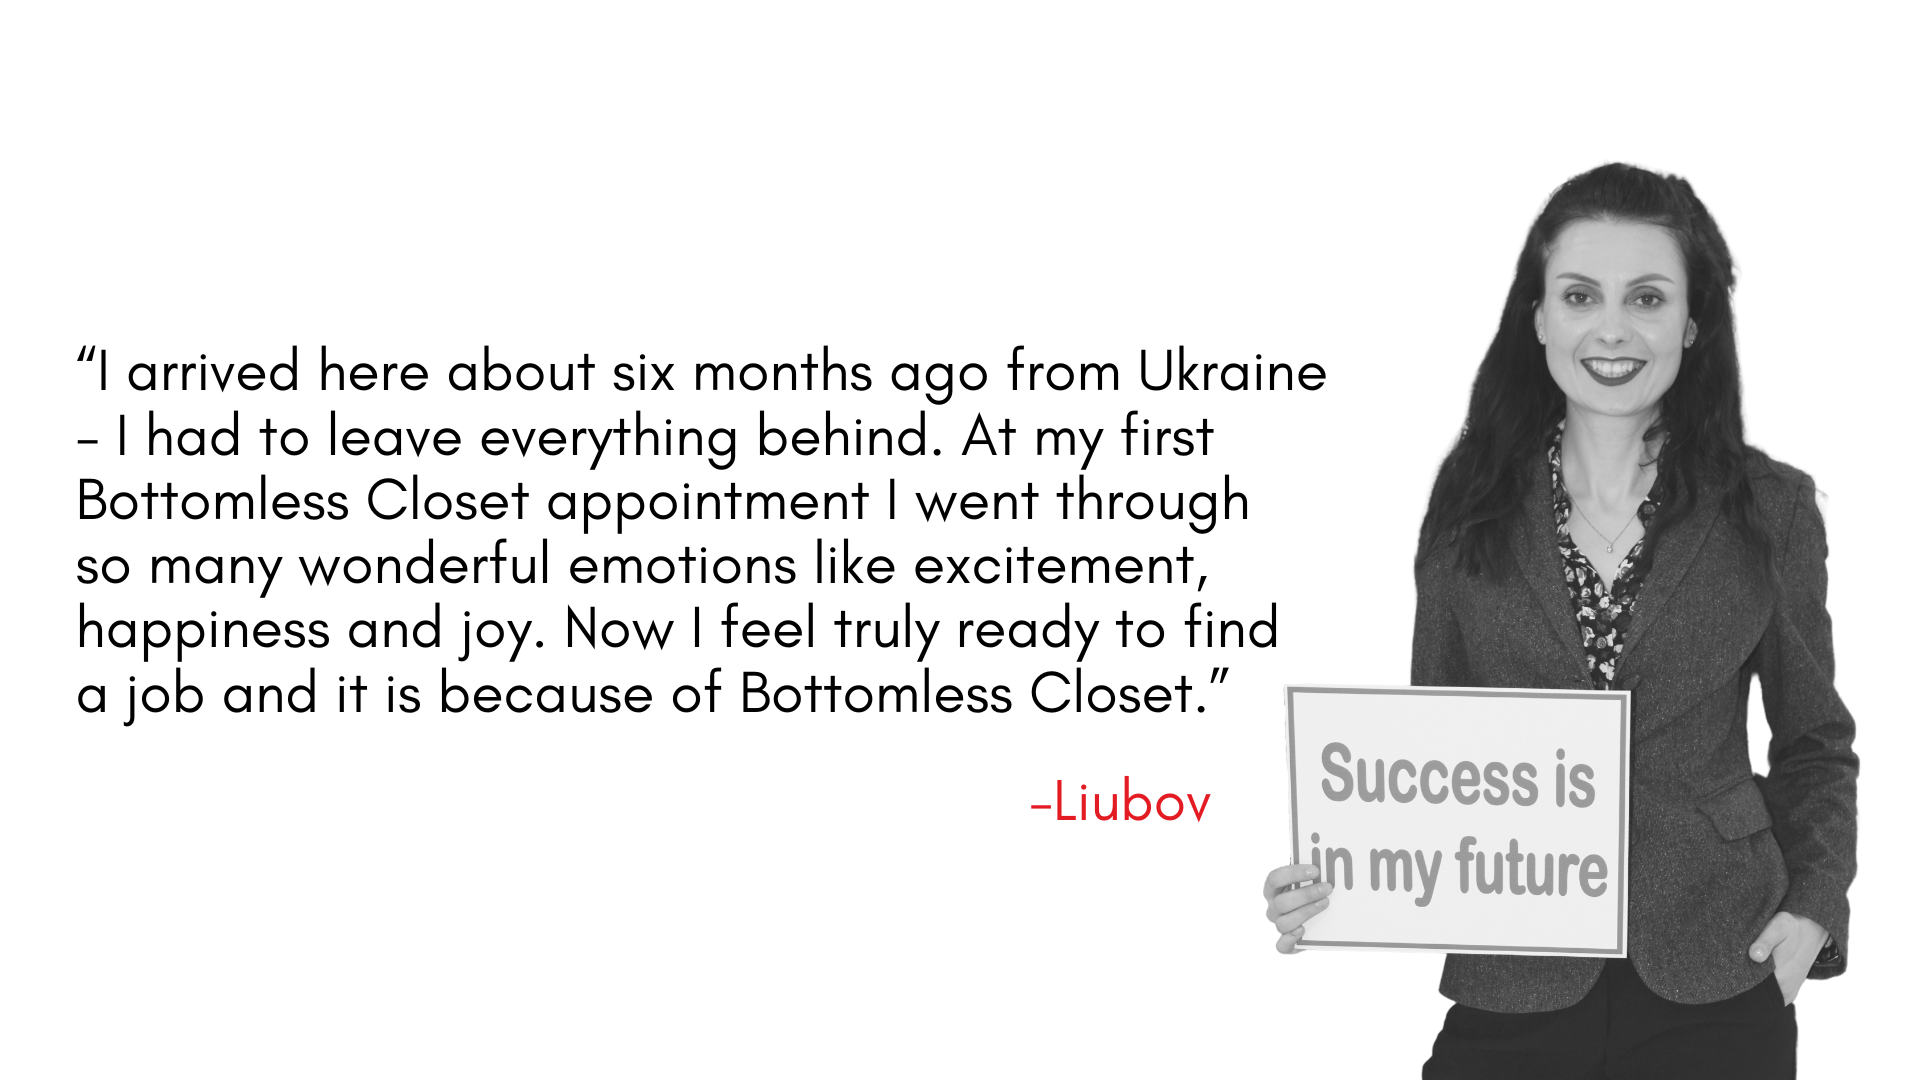 “I arrived here about six months ago from Ukraine - I had to leave everything behind. At my first Bottomless Closet appointment I went through so many wonderful emotions like excitement, happiness and joy. Now I feel truly ready to find a job and it is because of Bottomless Closet.” 